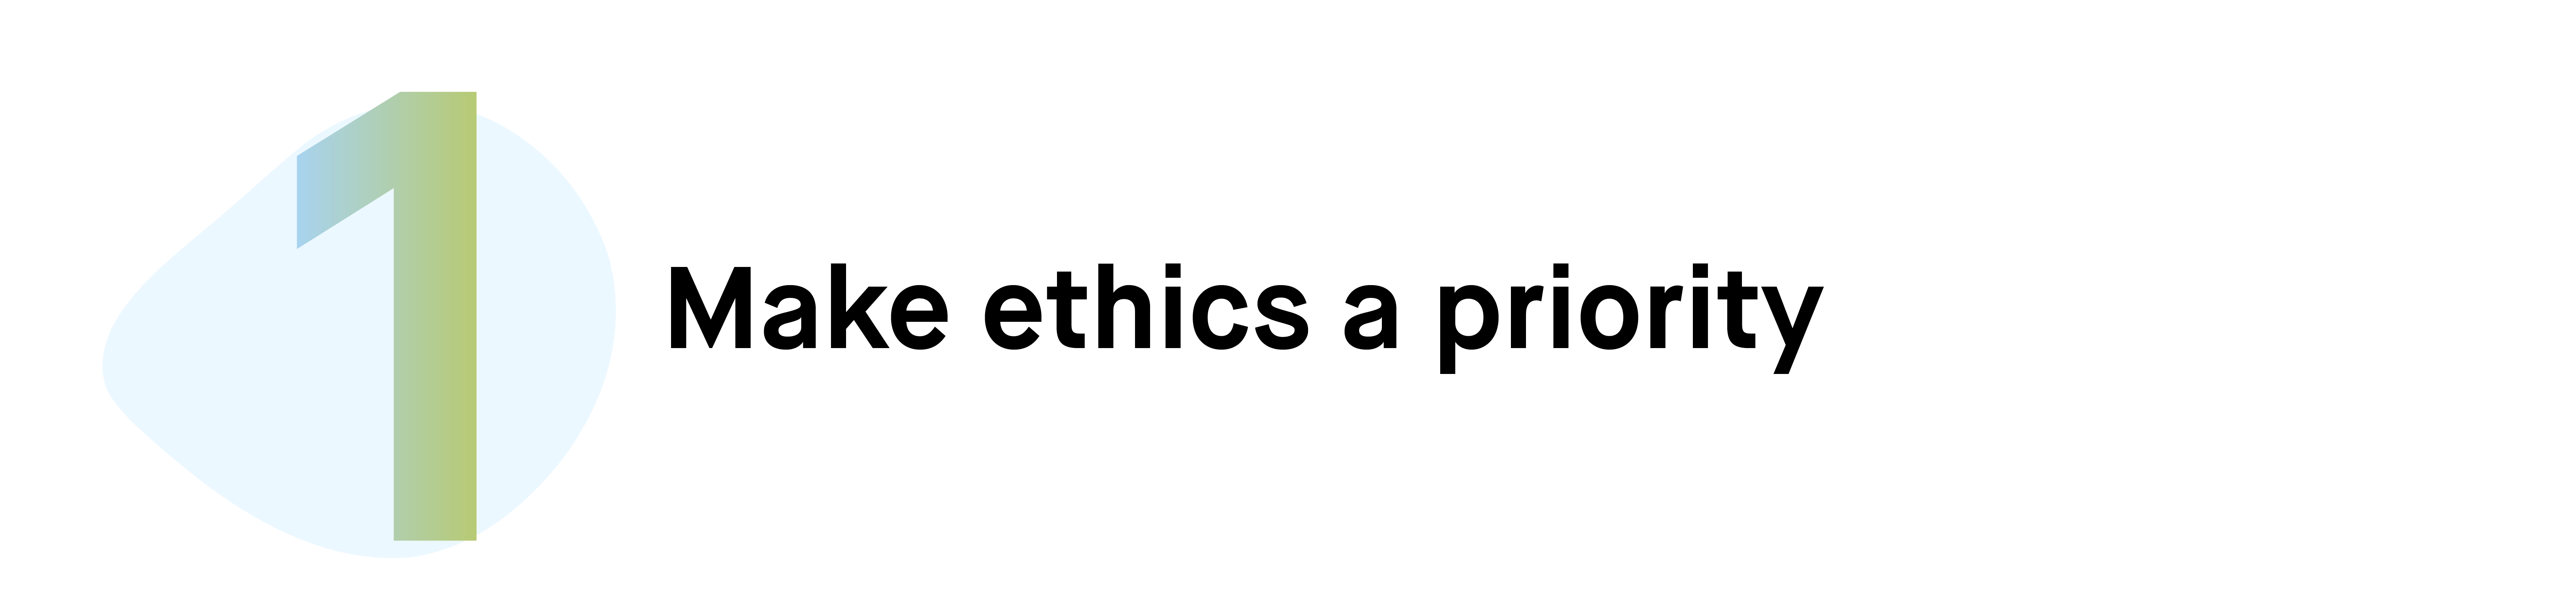 Number 1: Make ethics a priority